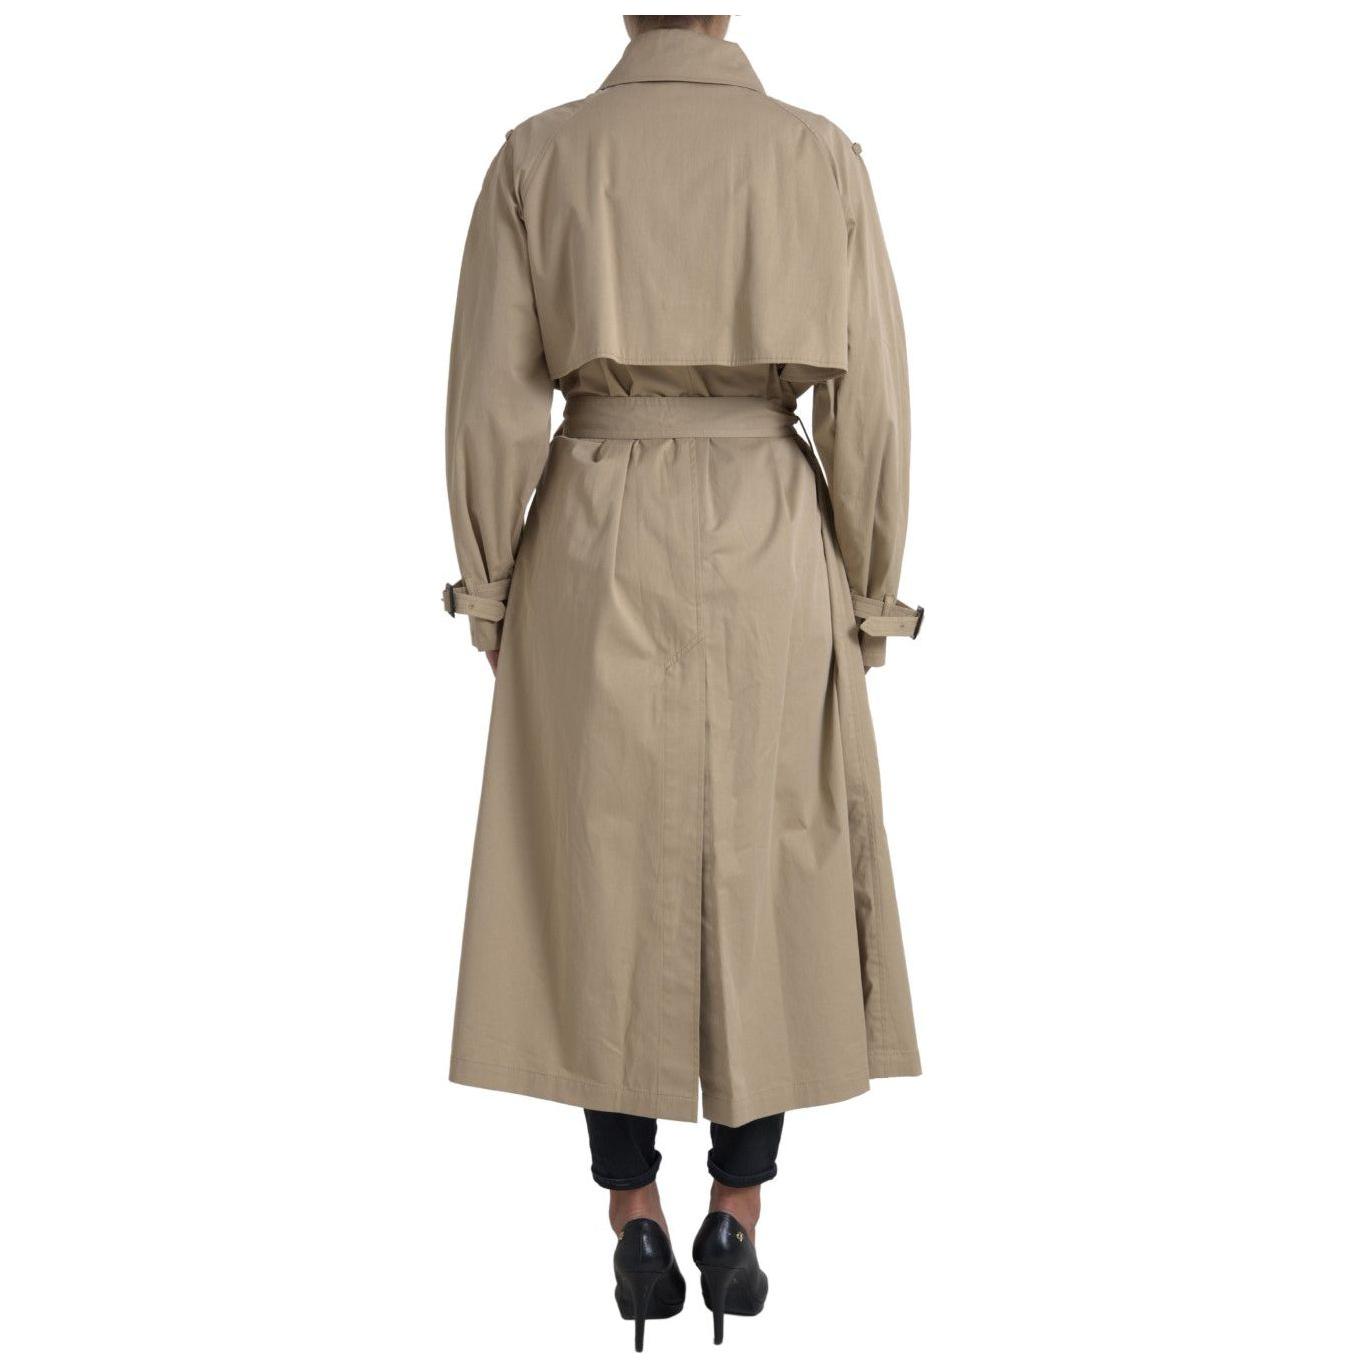 Dolce & Gabbana Elegant Double Breasted Trench Coat khaki-double-breasted-trench-coat-jacket 465A0139-Medium-775aa91c-318.jpg